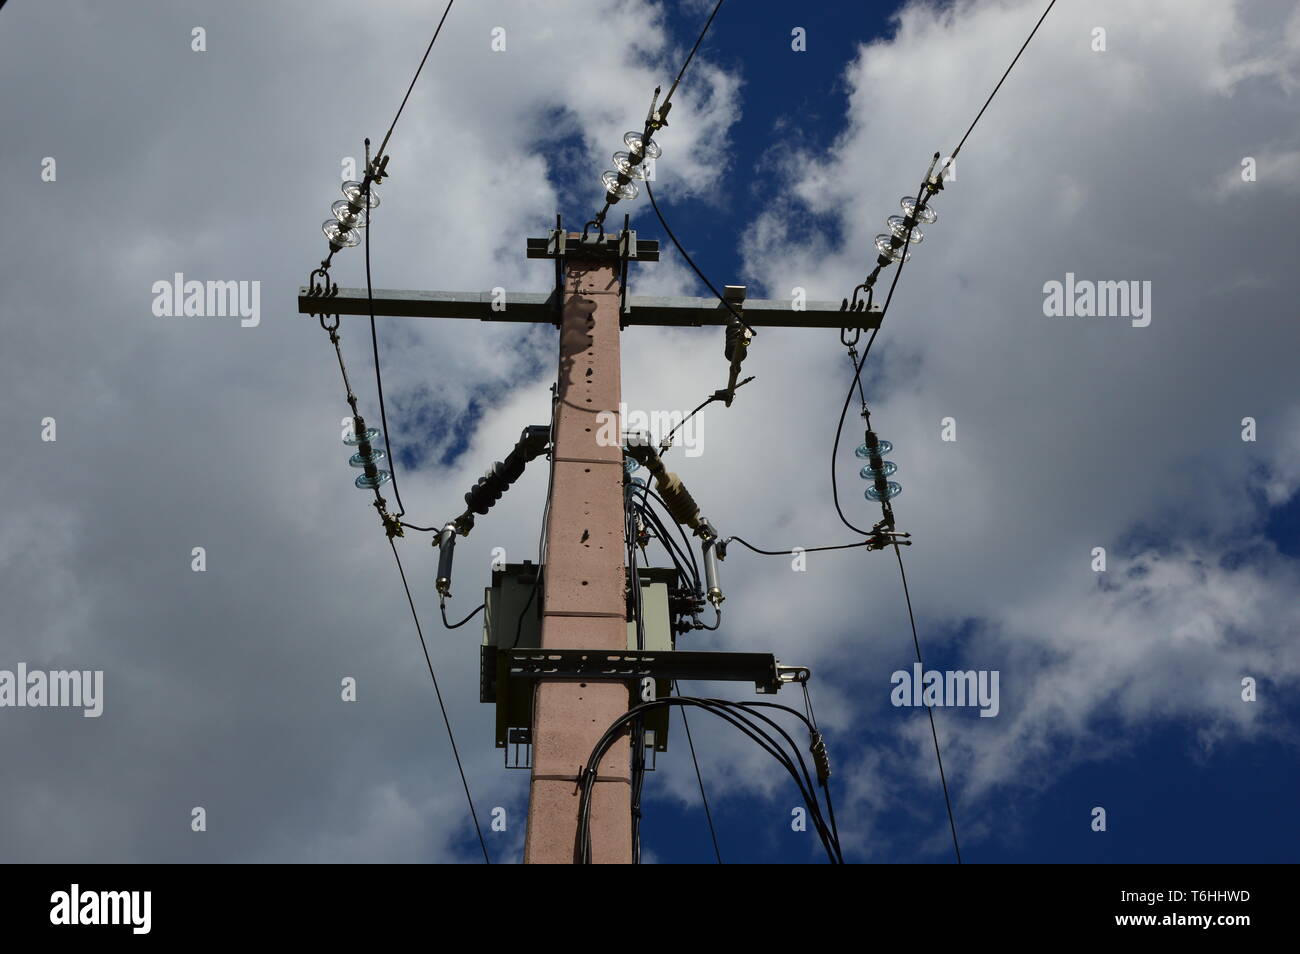 A current transformer on a power pole Stock Photo